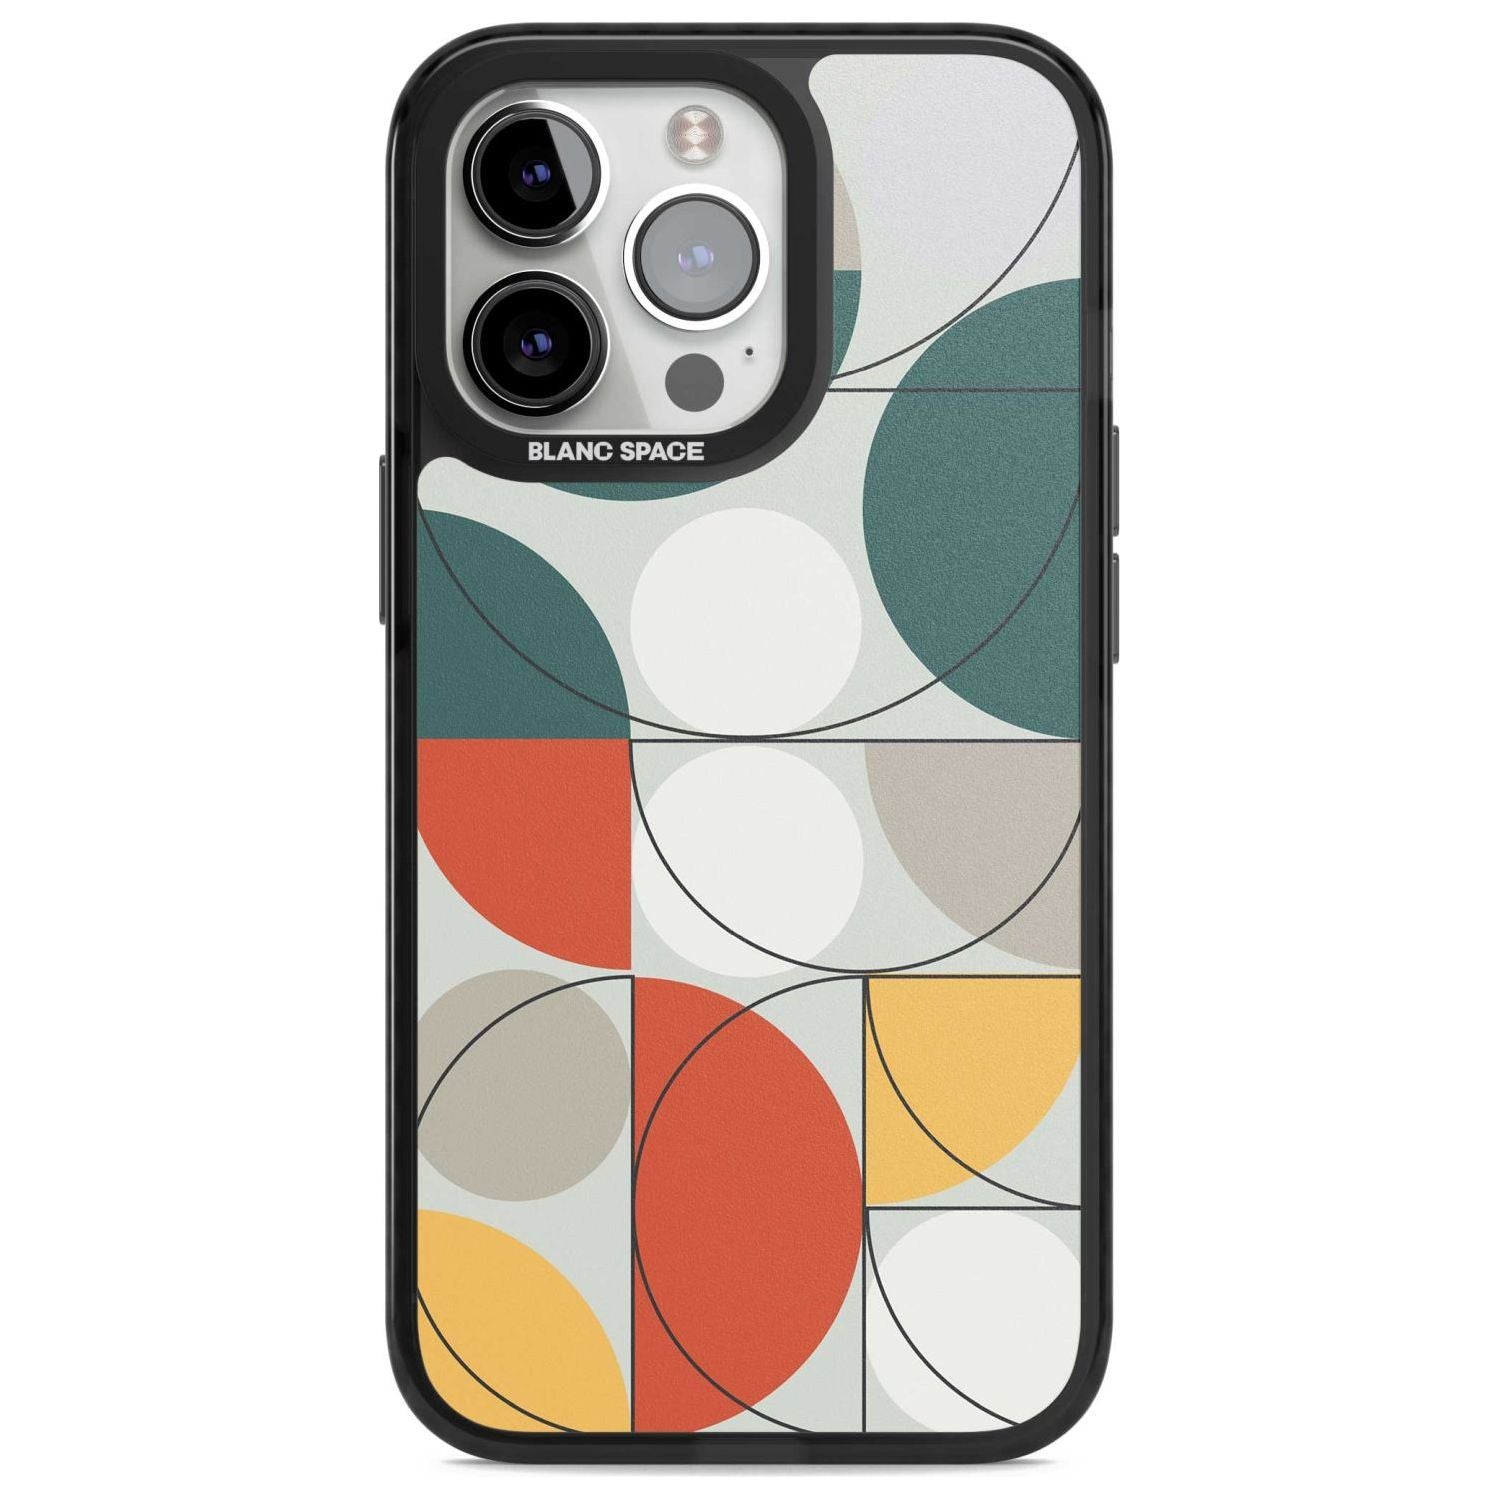 Abstract Half Circles Phone Case iPhone 15 Pro Max / Magsafe Black Impact Case,iPhone 15 Pro / Magsafe Black Impact Case,iPhone 14 Pro Max / Magsafe Black Impact Case,iPhone 14 Pro / Magsafe Black Impact Case,iPhone 13 Pro / Magsafe Black Impact Case Blanc Space